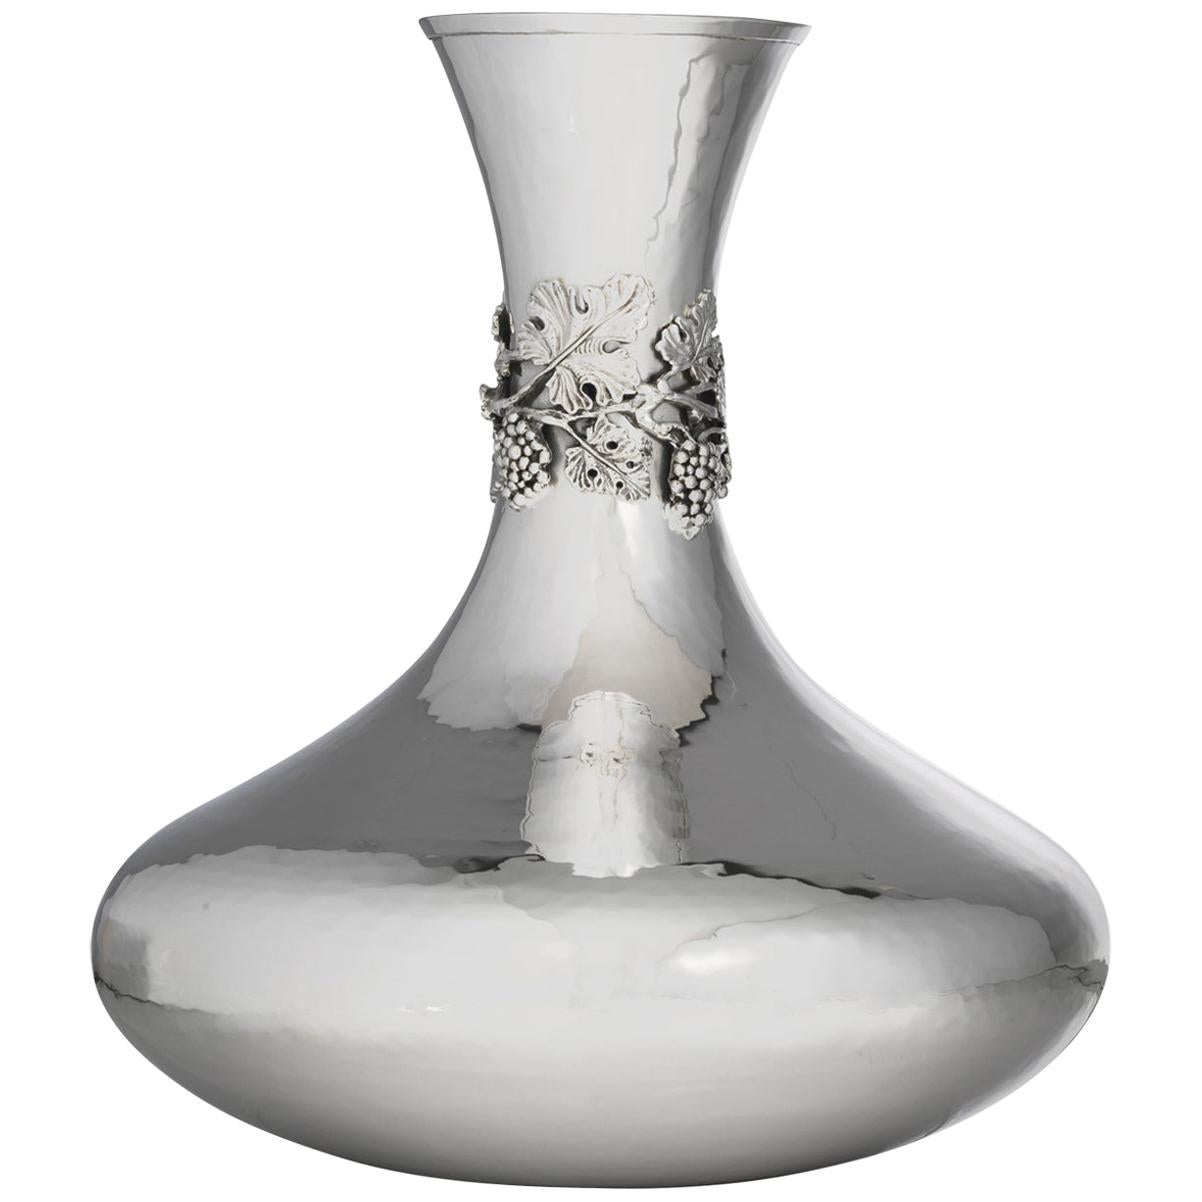 For luxurious elegance at the table, this piece is created for an engaging tactile experience and will provide a touch of class when entertaining. With charming grape detail and crafted in silver, this small grape decanter features unique properties